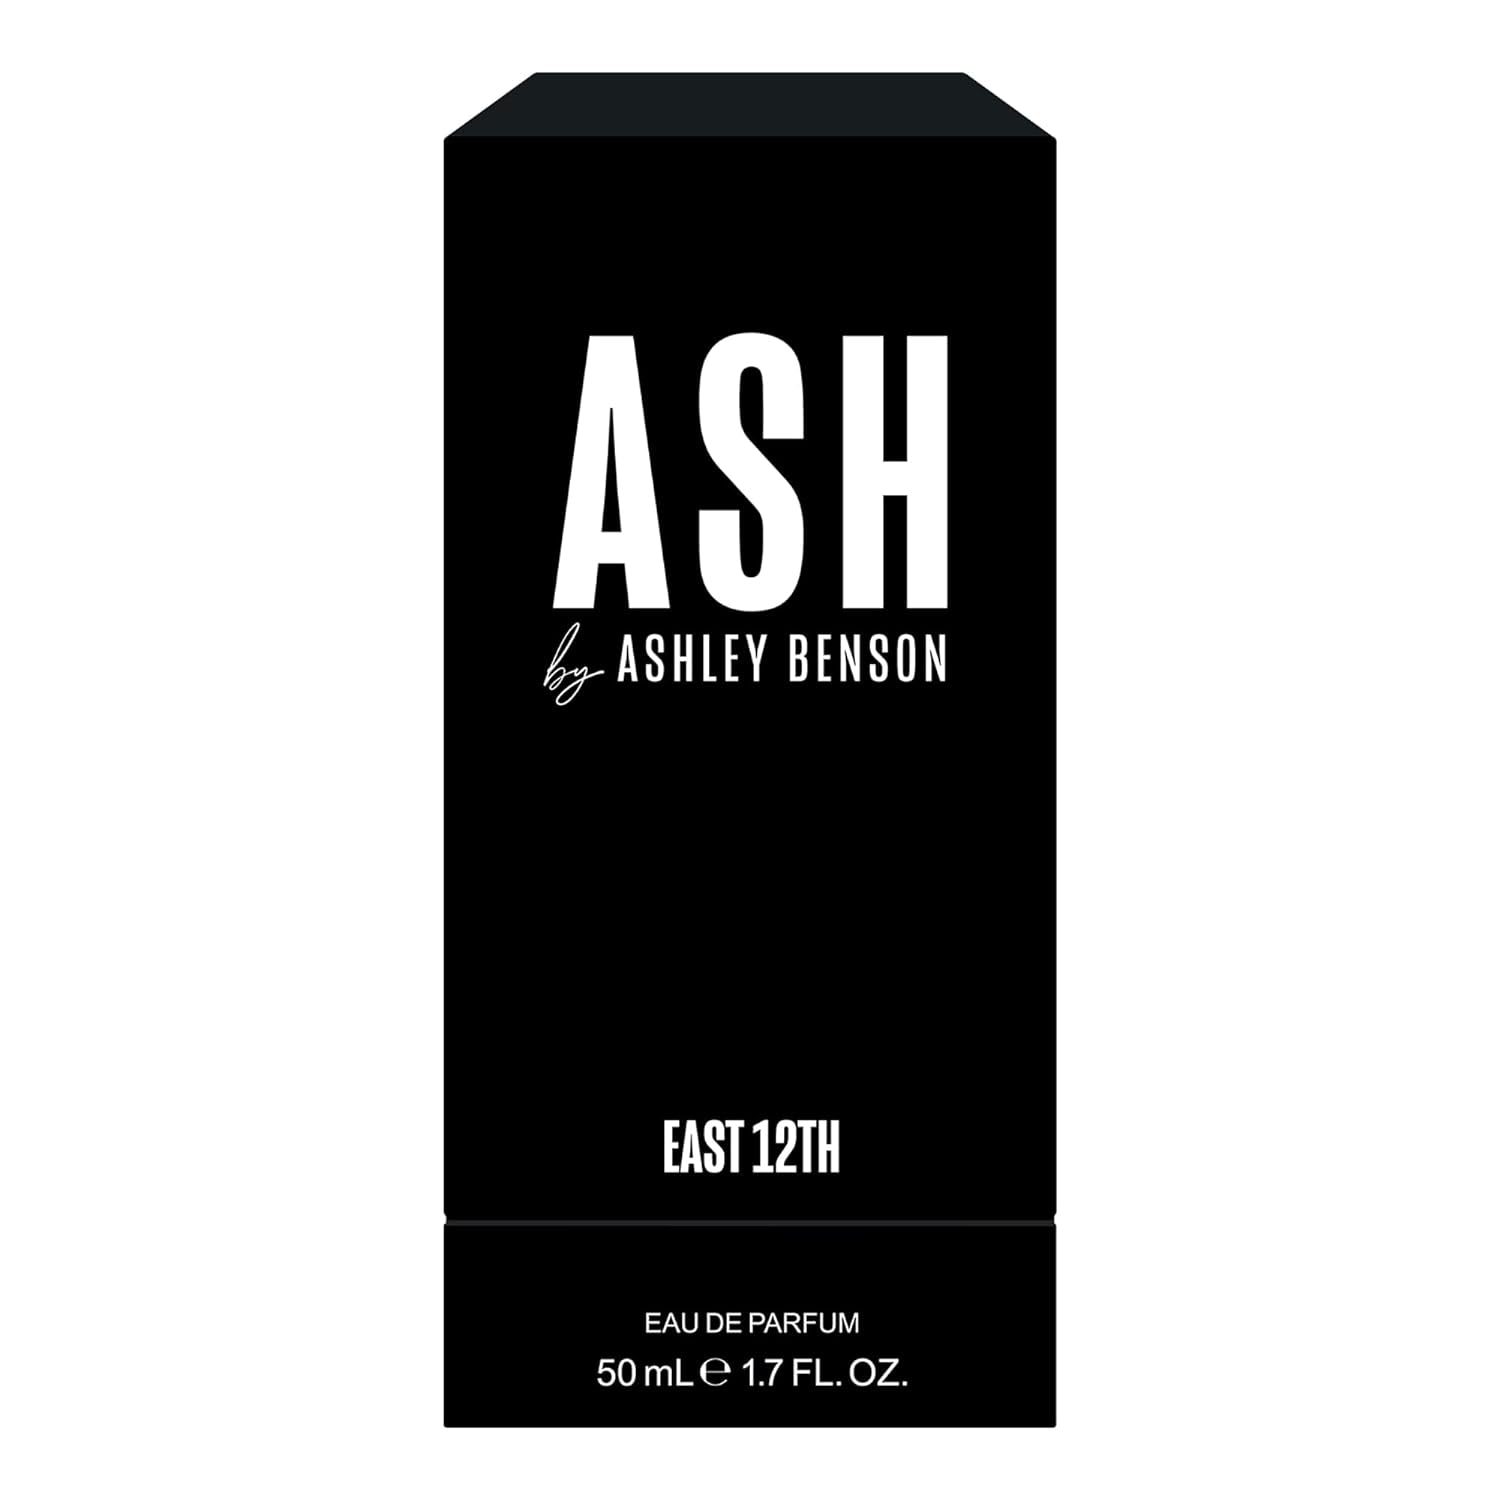 East 12th - Ash by Ashley Benson - Perfume for Men and Women - Bold and Exhilarating Fragrance - Appealing Scent of New York - With Rose Damask, Black Cedar, and Zesty Orange - 1.7 oz EDP Spray